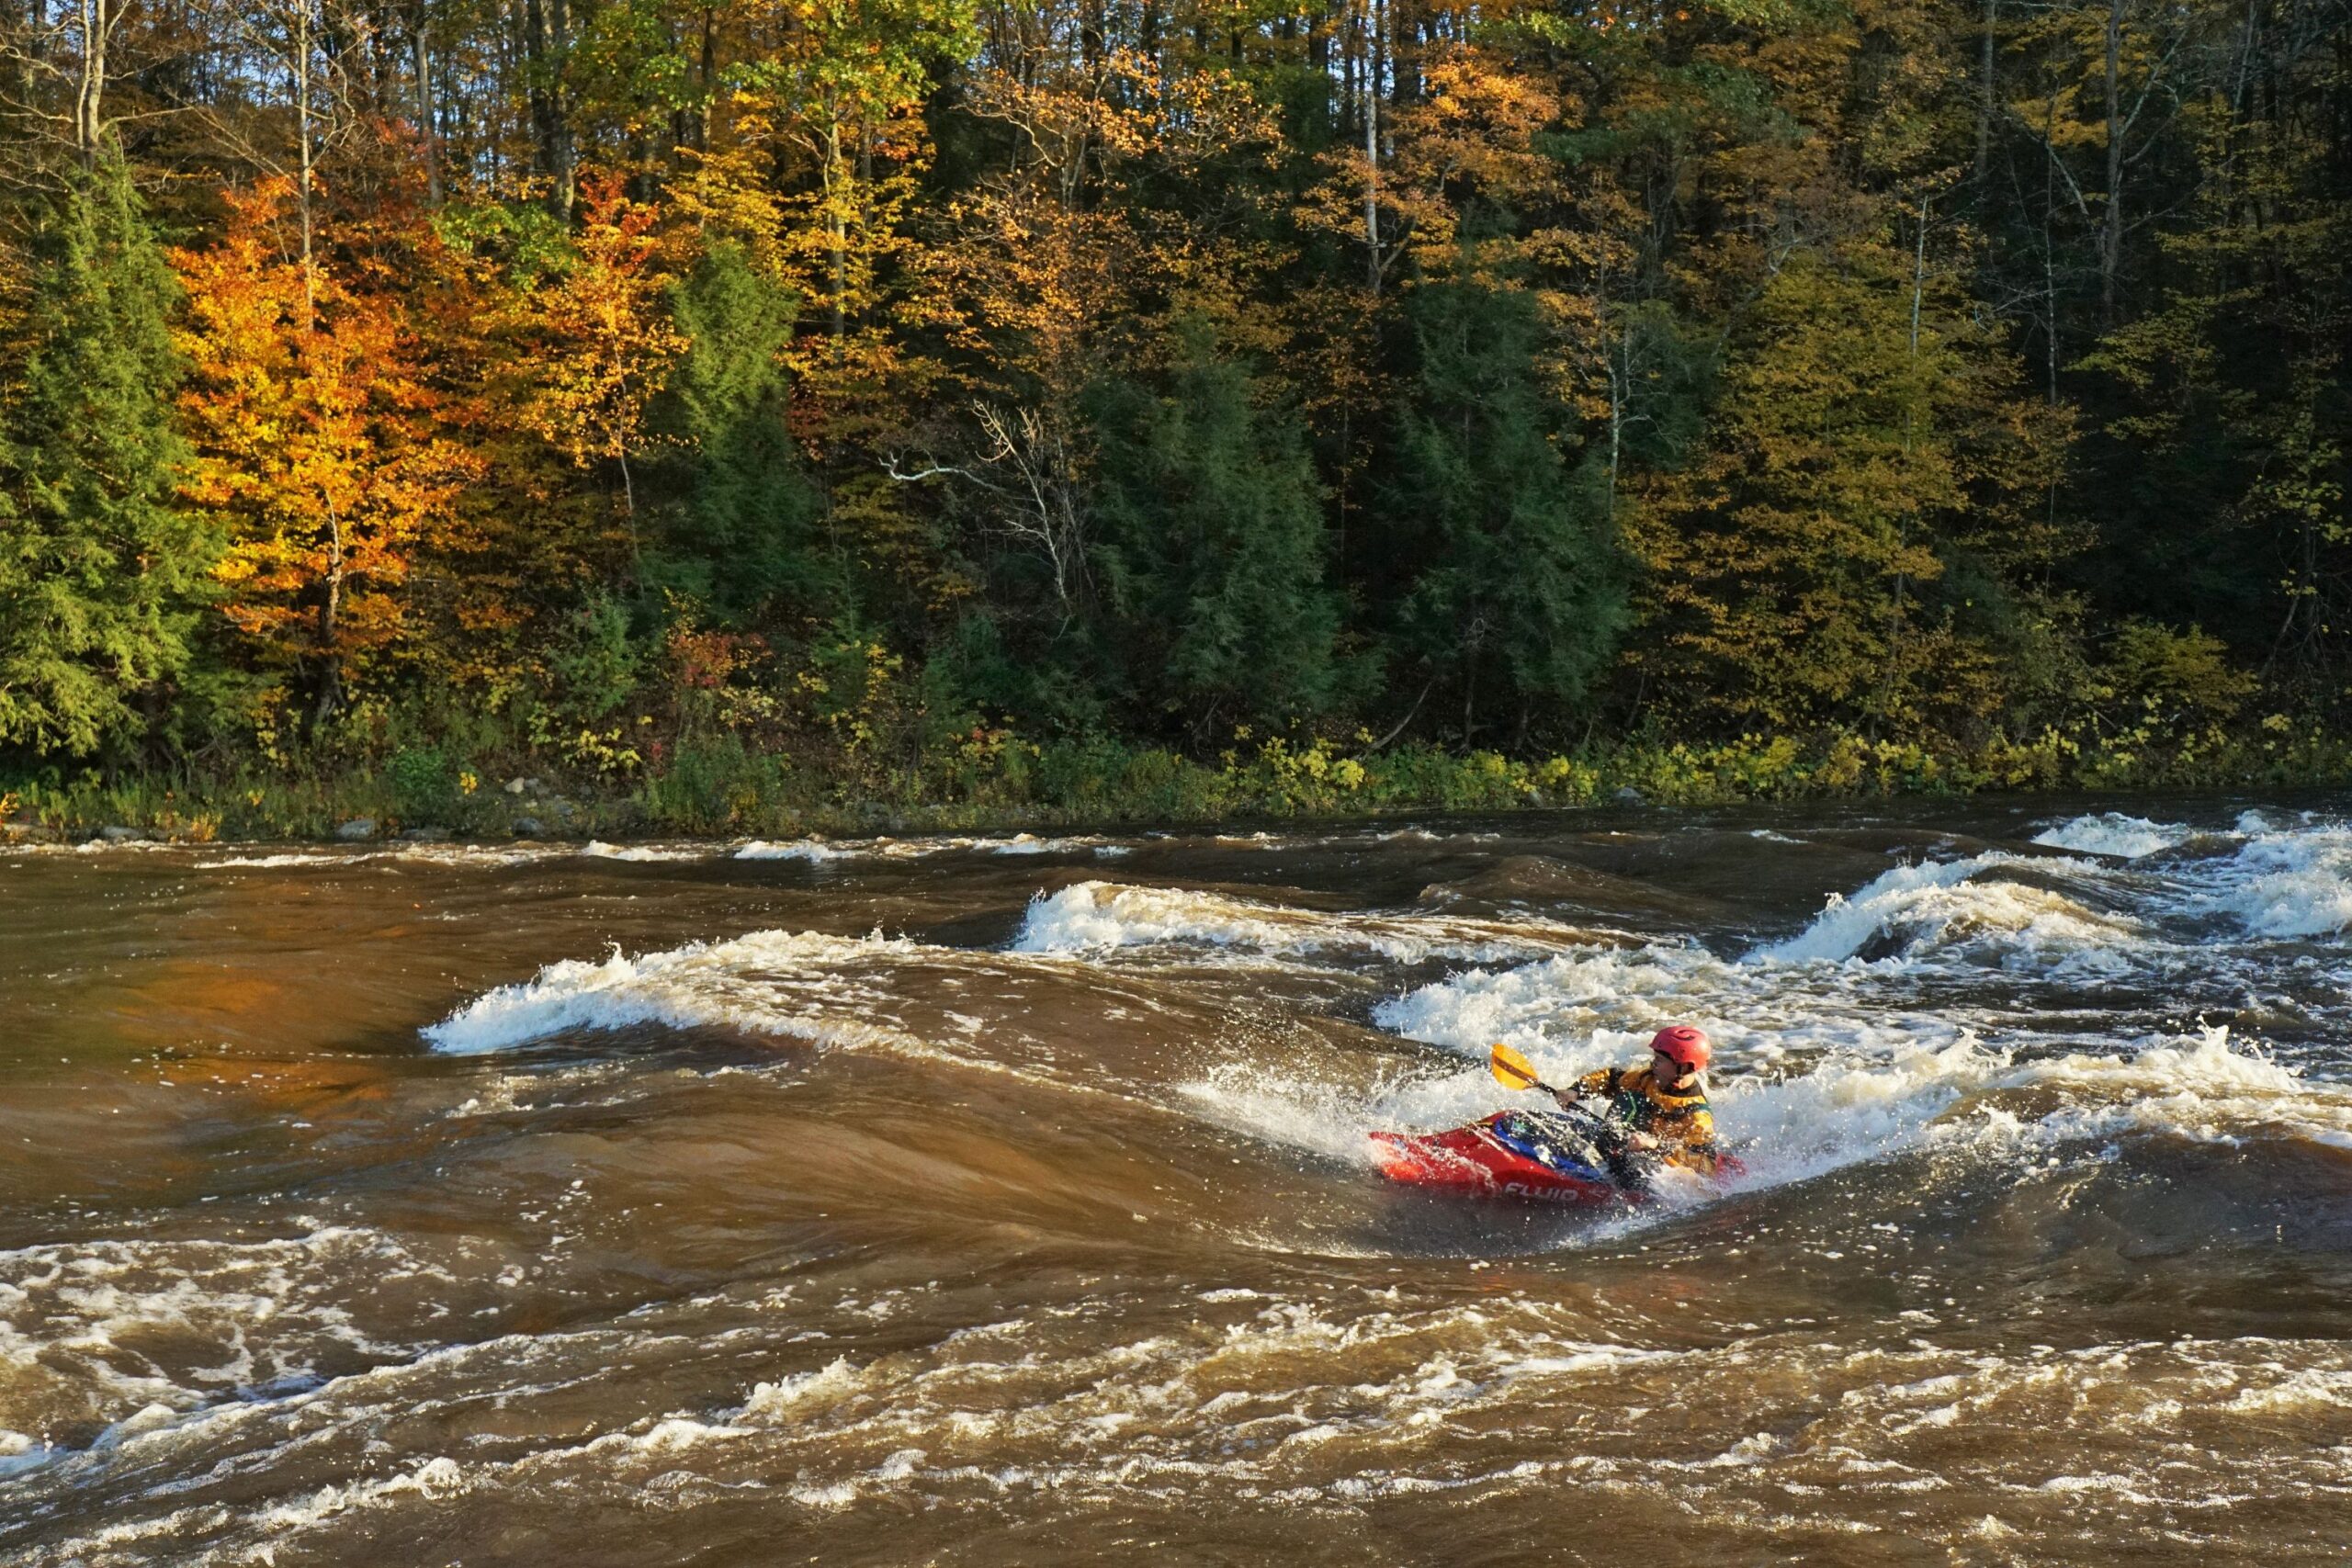 Kayaker Clay Murphy surfs a wave on the 5 Chutes Rapids of the Lamoille River Vermont whitewater kayaking